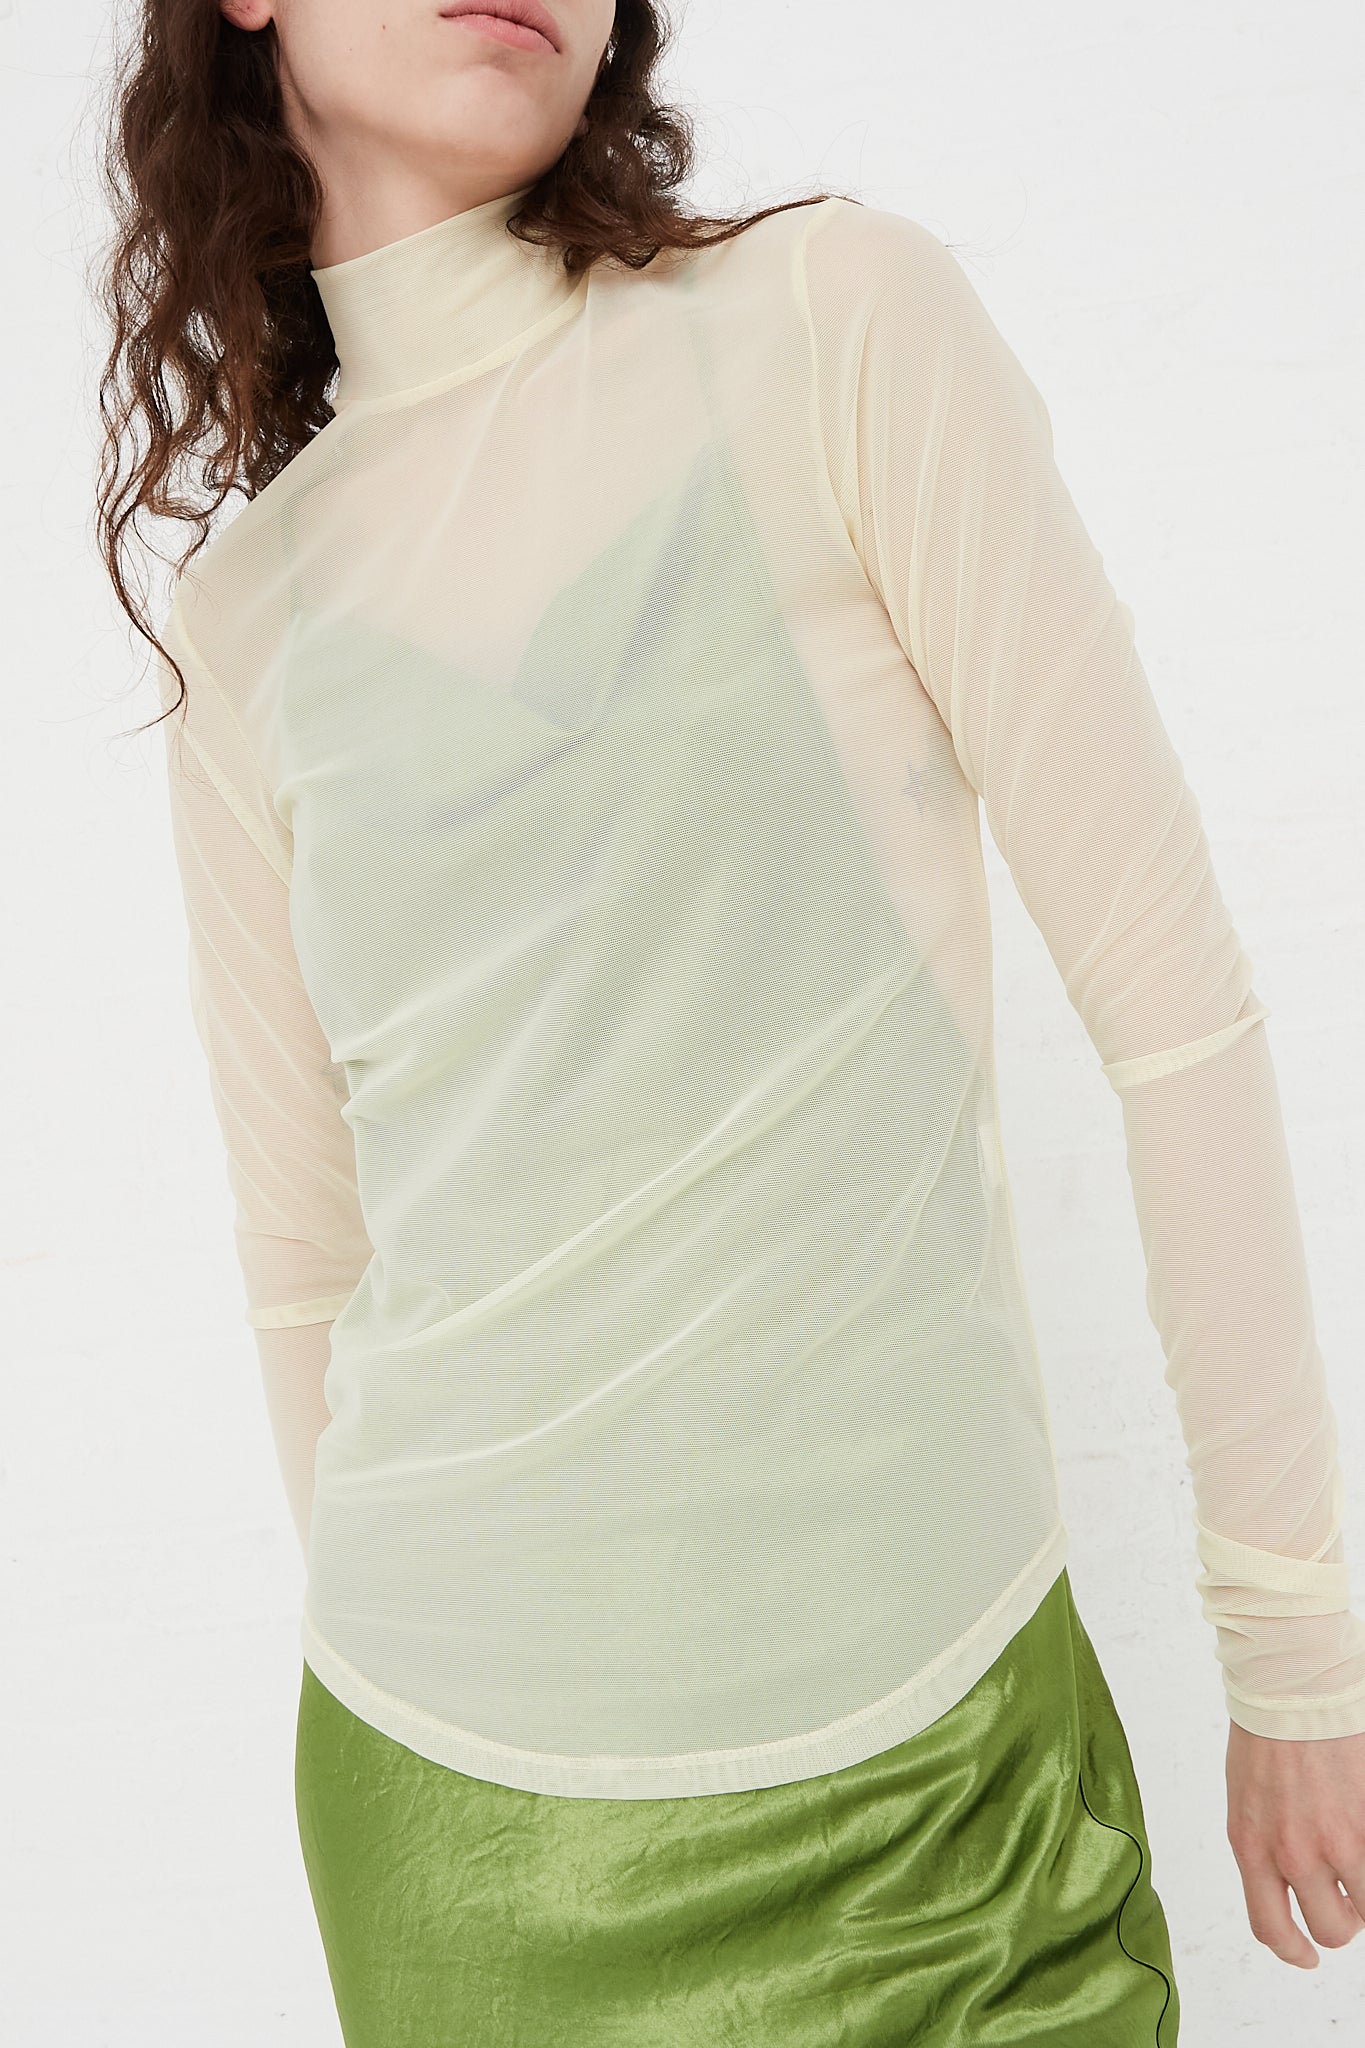 A model wearing a green skirt and a green turtle neck top, designed by the Nomia brand, available at Oroboro store in NYC.